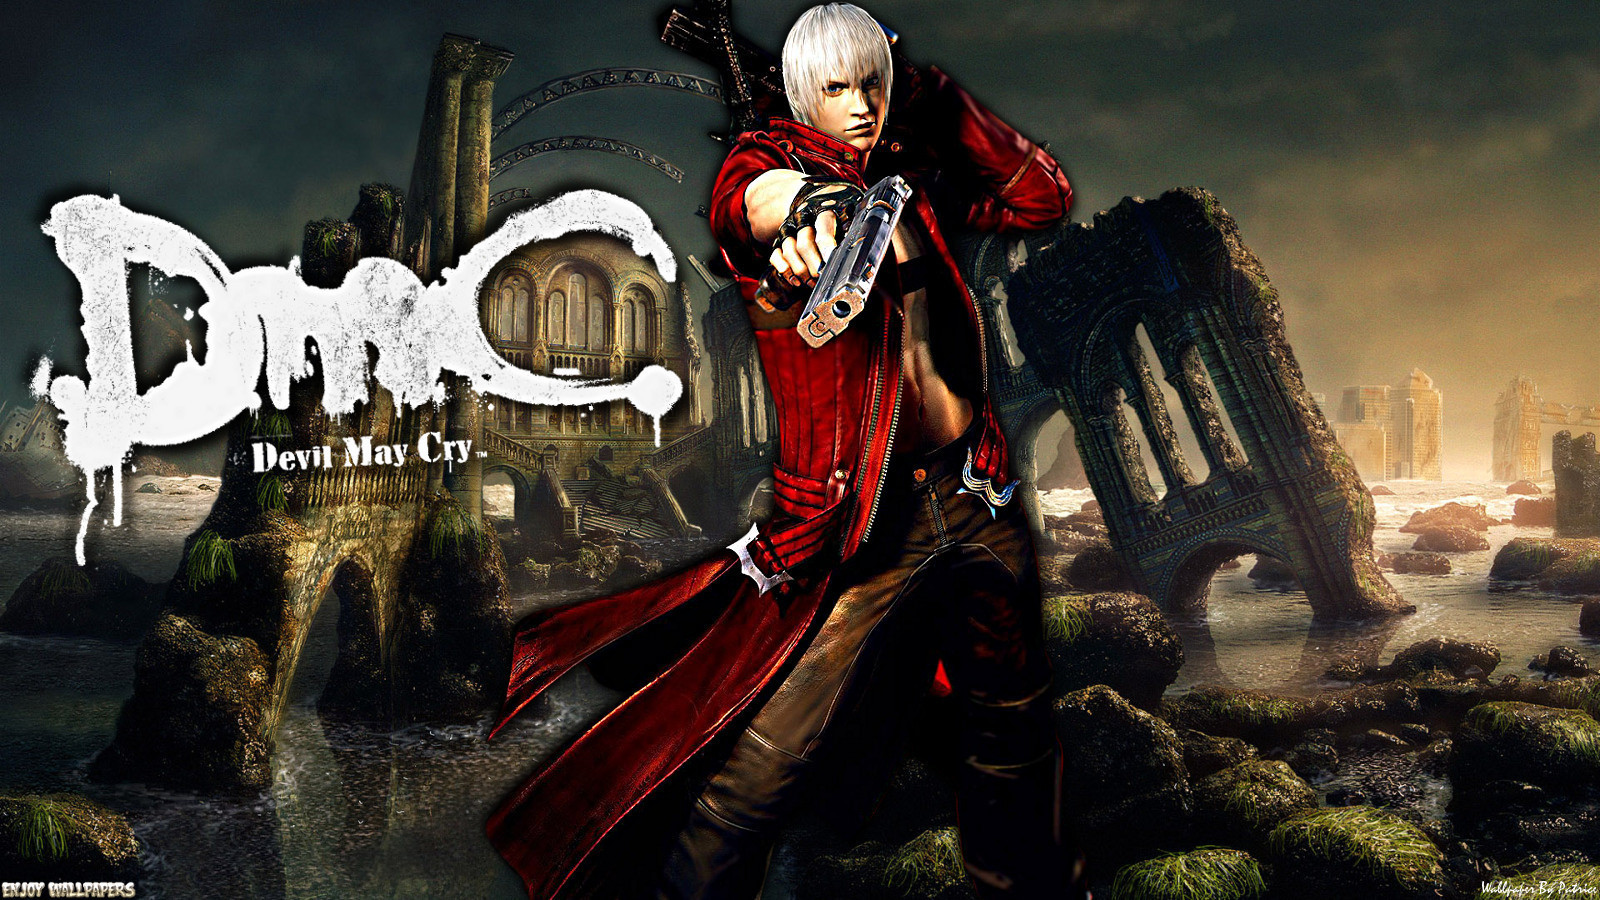 Download Devil May Cry Wallpaper Dante For Desktop pictures in high